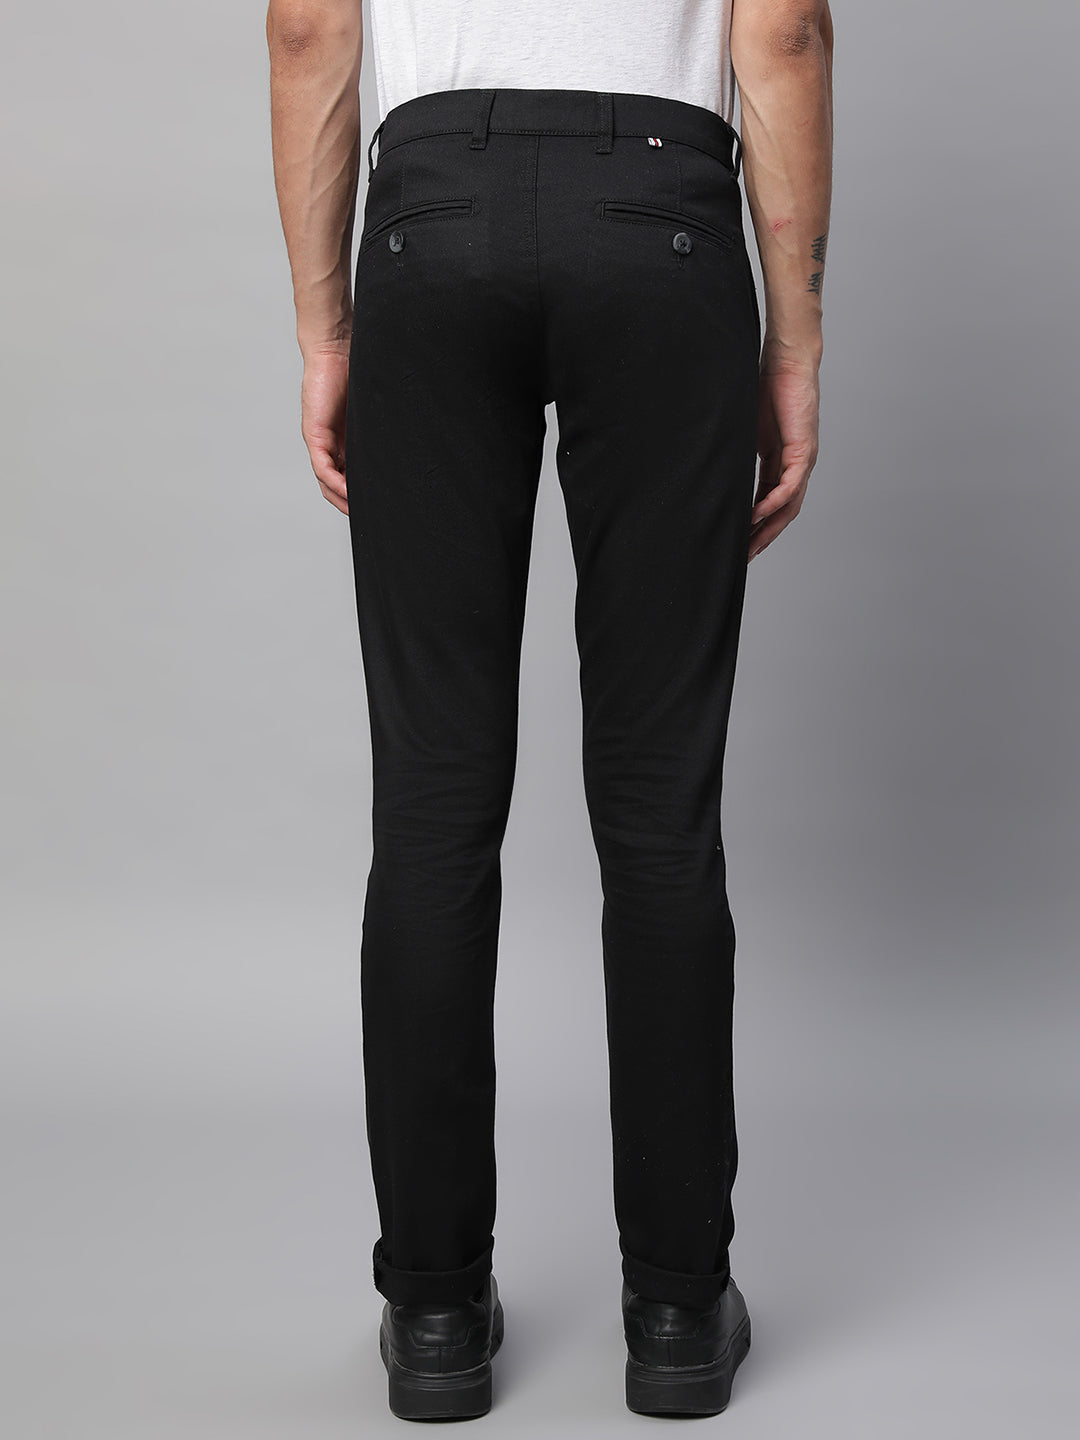 Mens Black Polyester Solid Trouser